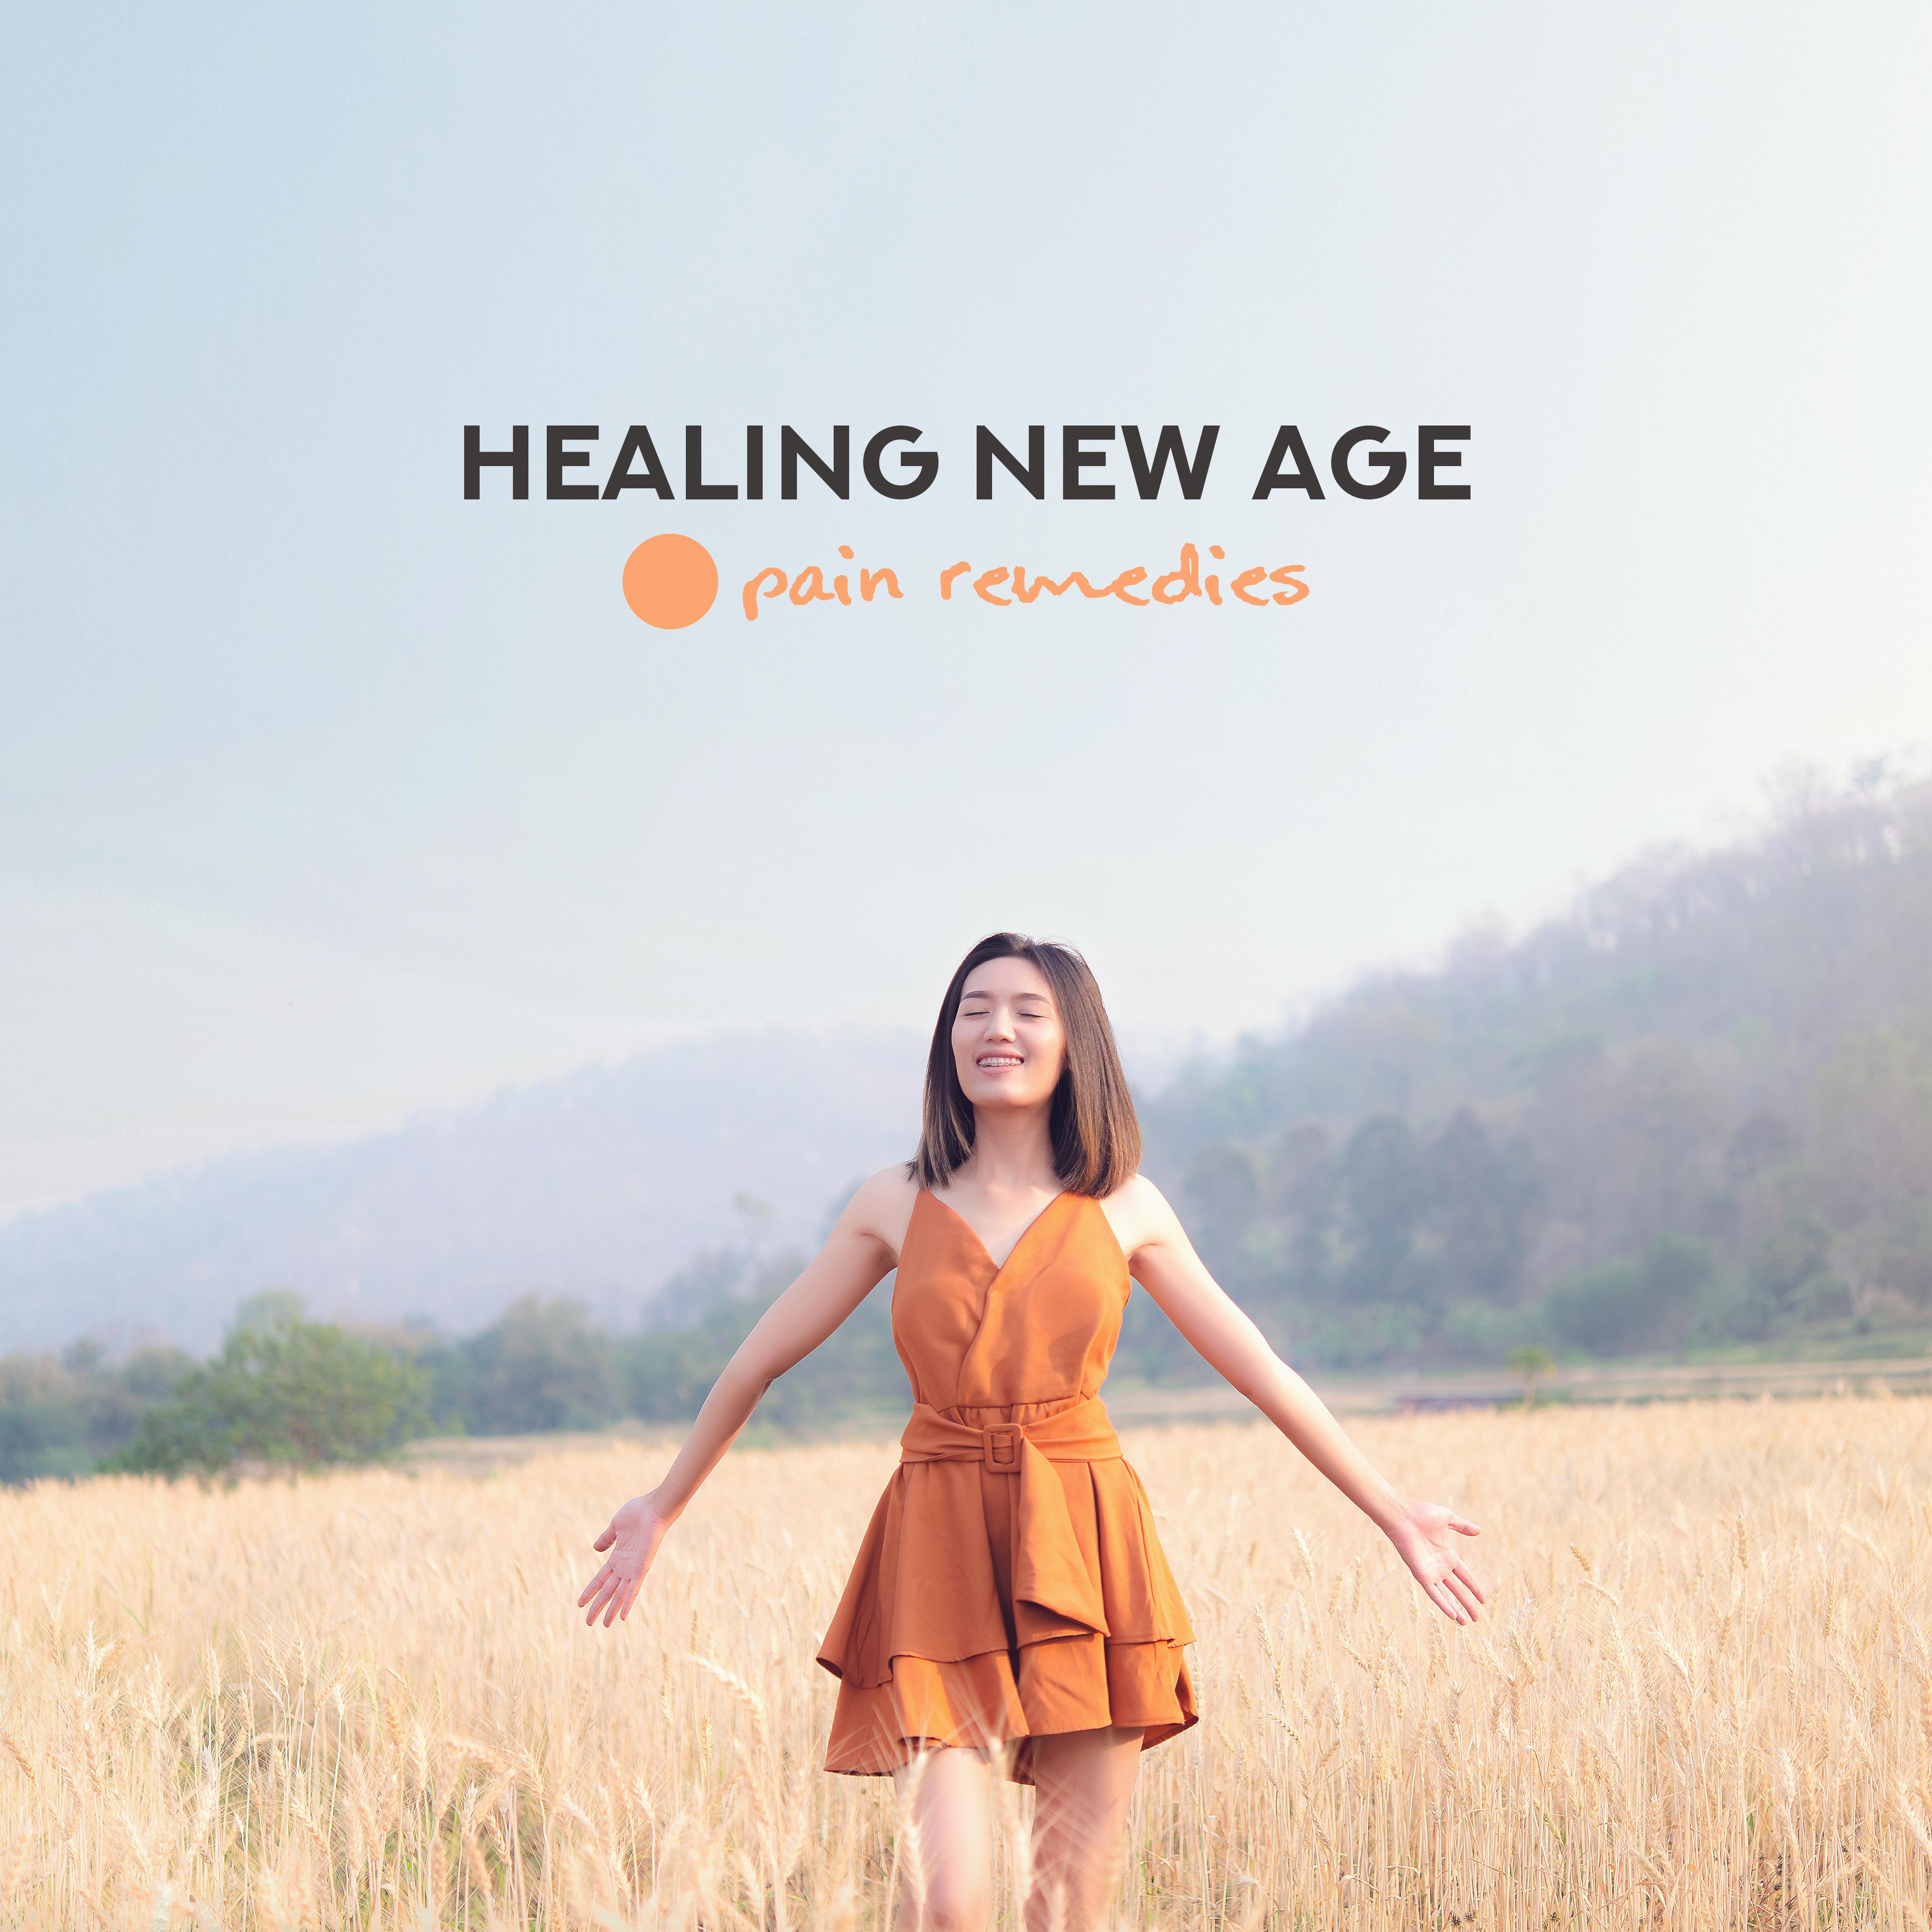 Healing New Age Pain Remedies: 2019 Music for Reduce Pain, Headache and Any Other Pain Relief, Calming Sounds for Fight with Stressful Situations, Rest for Body & Mind